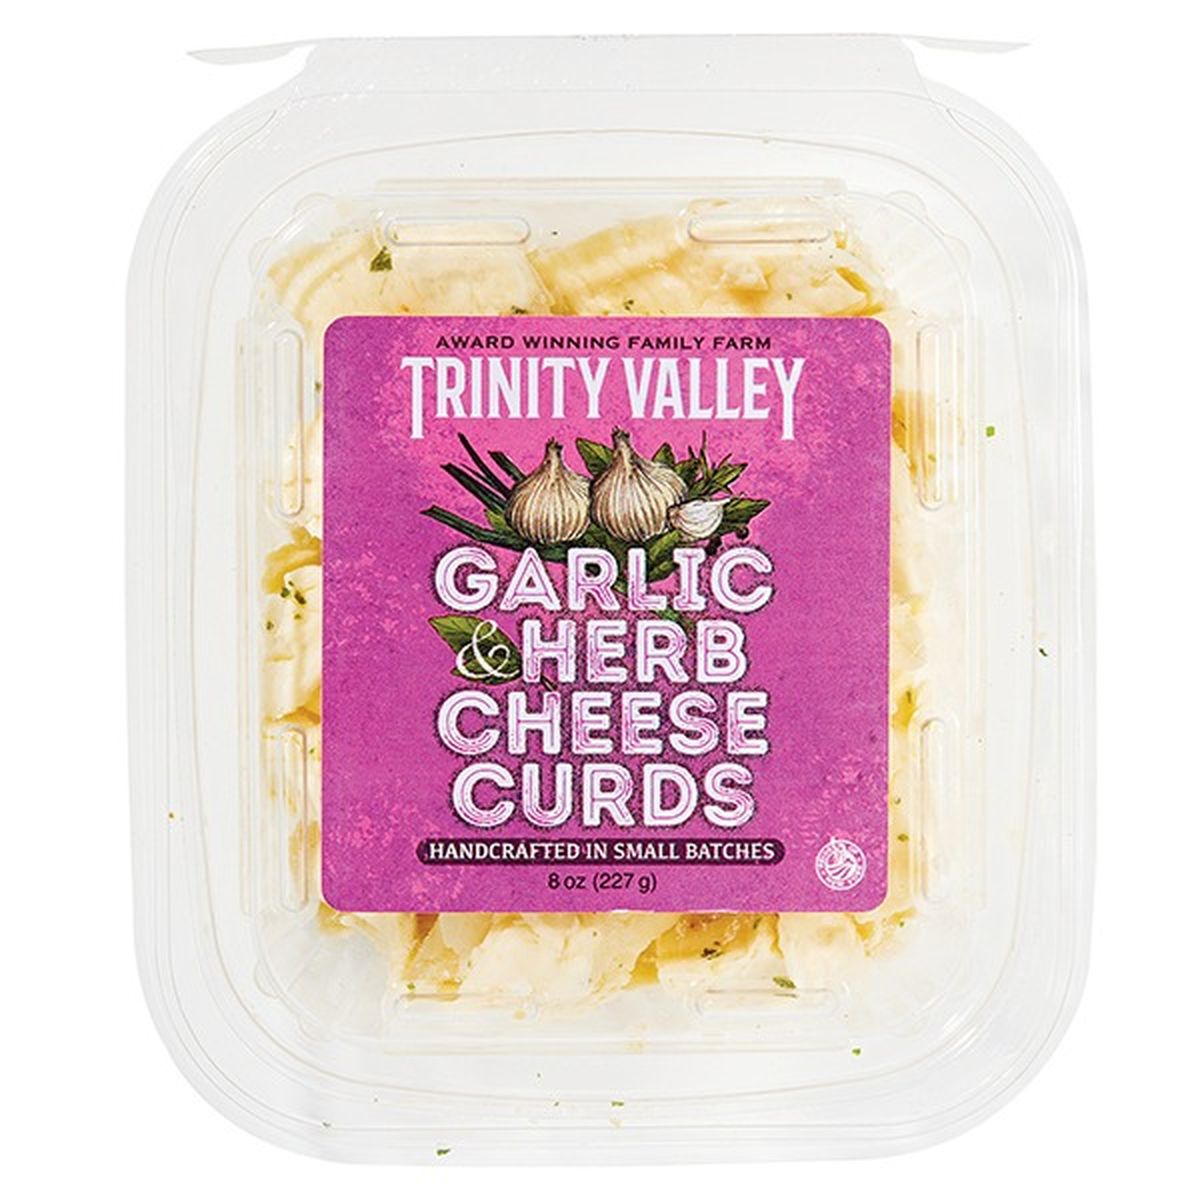 Calories in Trinity Valley Garlic & Herb Cheese Curds